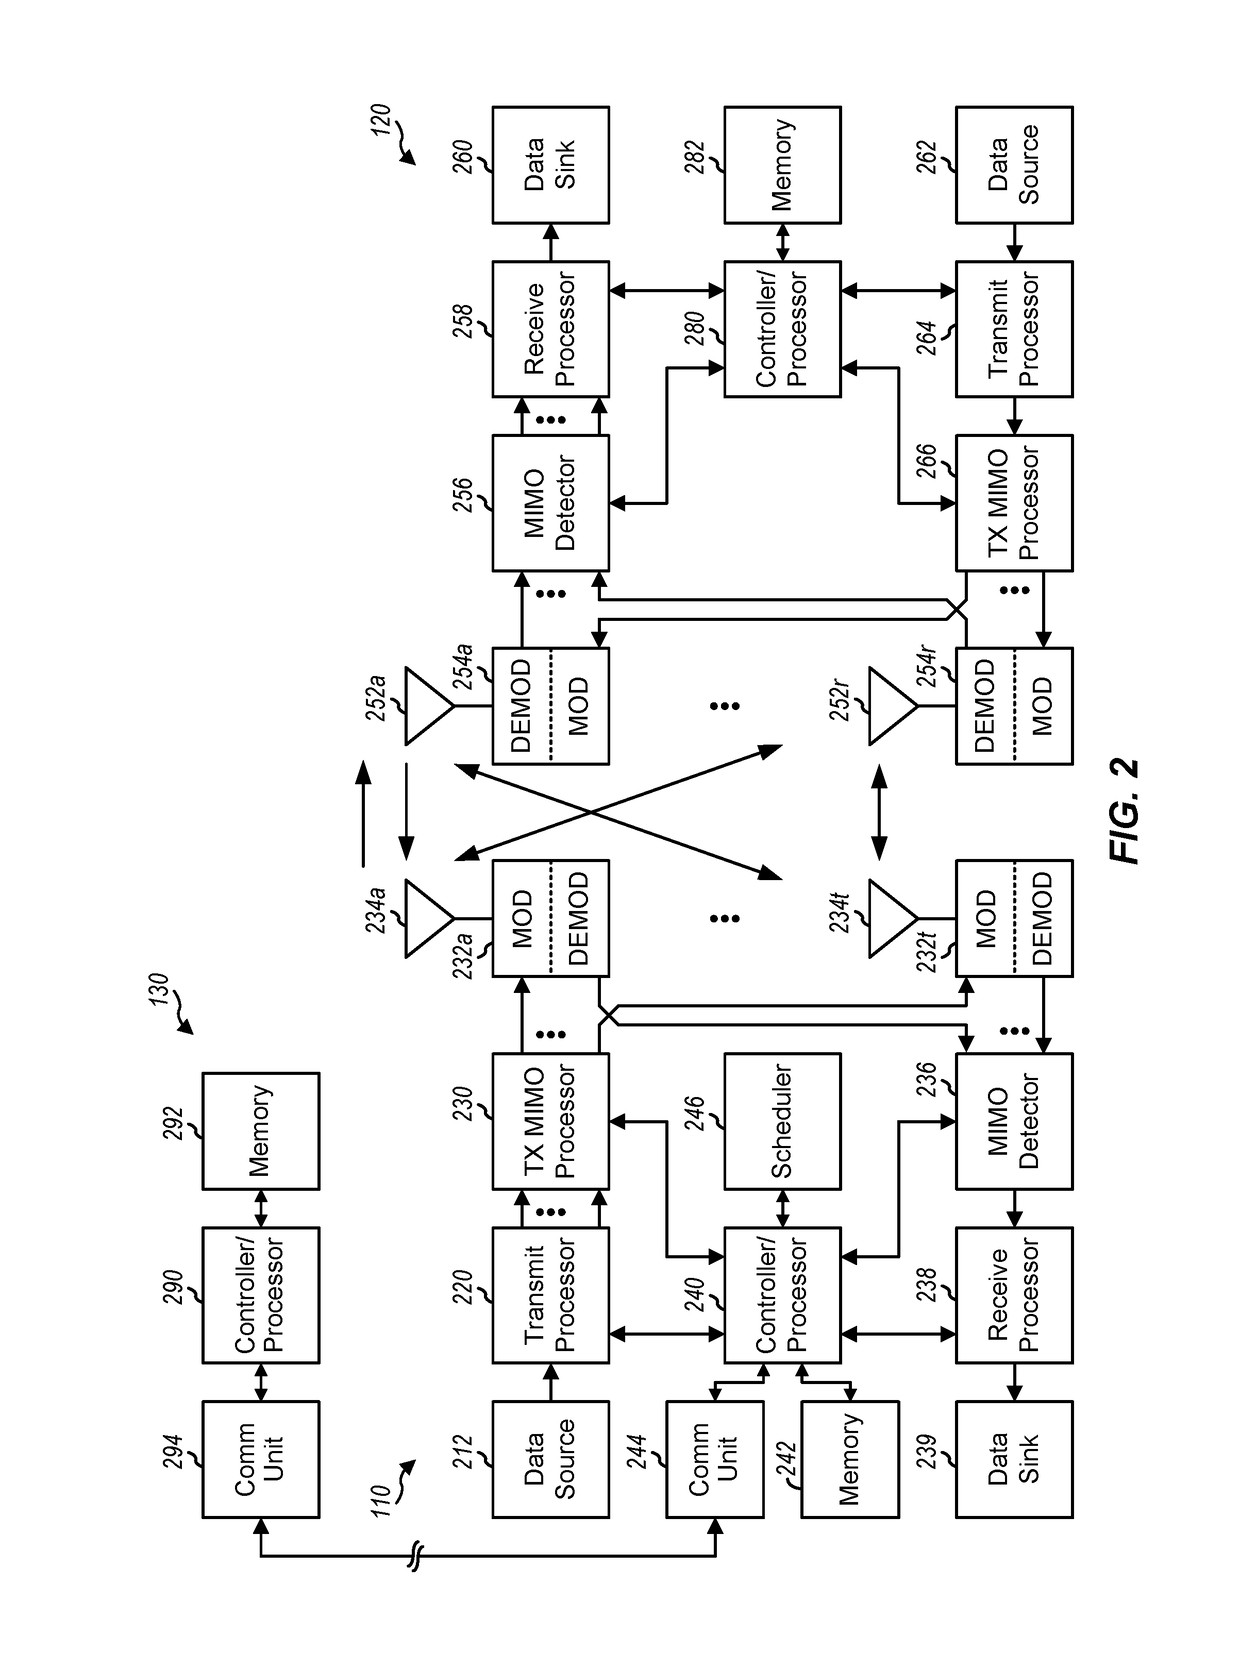 Narrowband positioning signal design and procedures